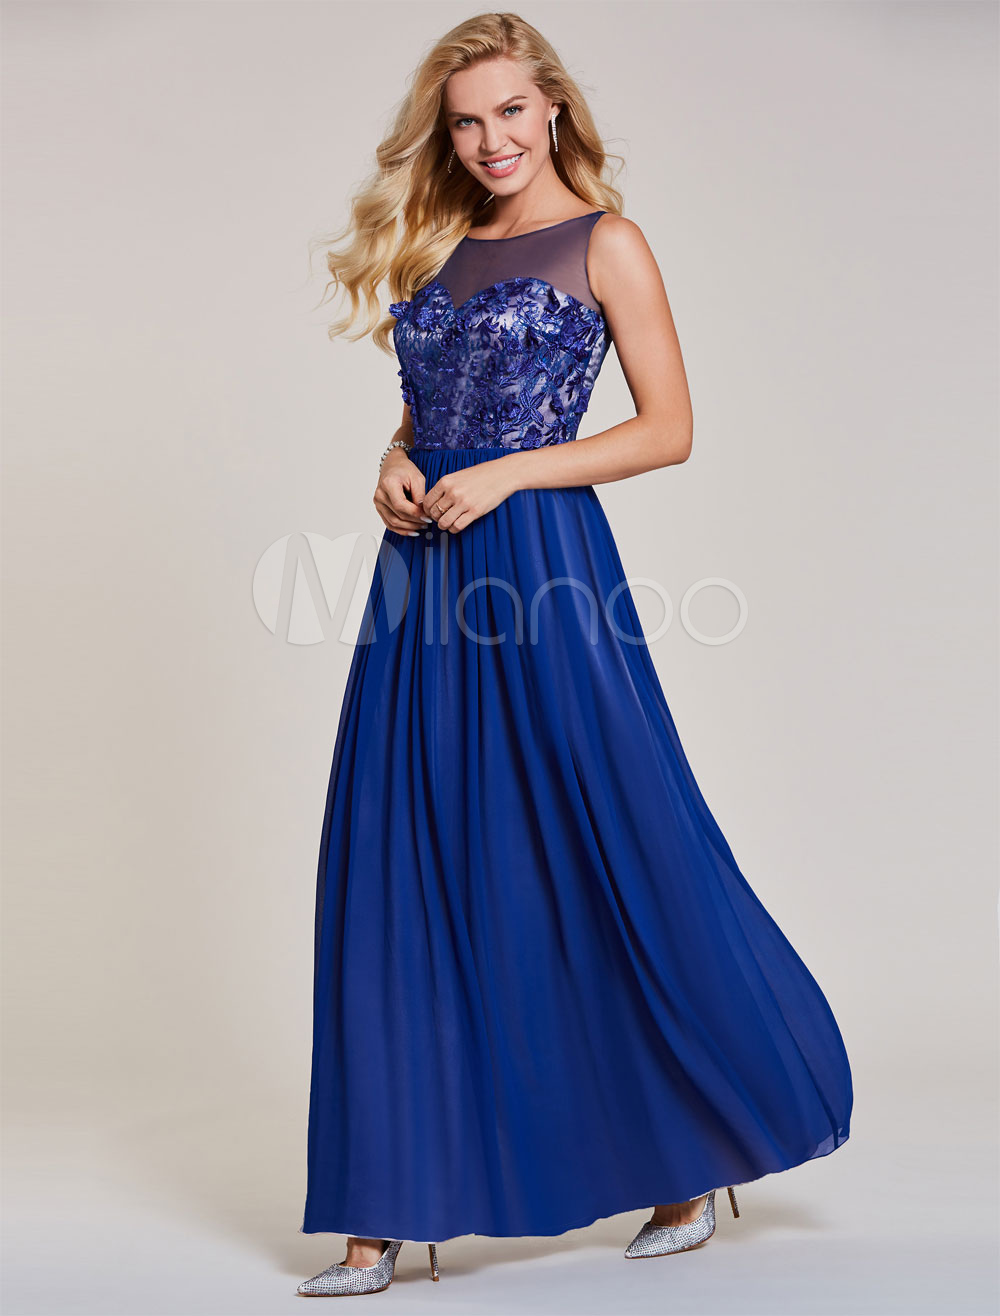 Long Prom Dresses Royal Blue Chiffon Lace Sweetheart Illusion Sleeveless Floor Length Formal Party Dress (Wedding Cheap Party Dress) photo